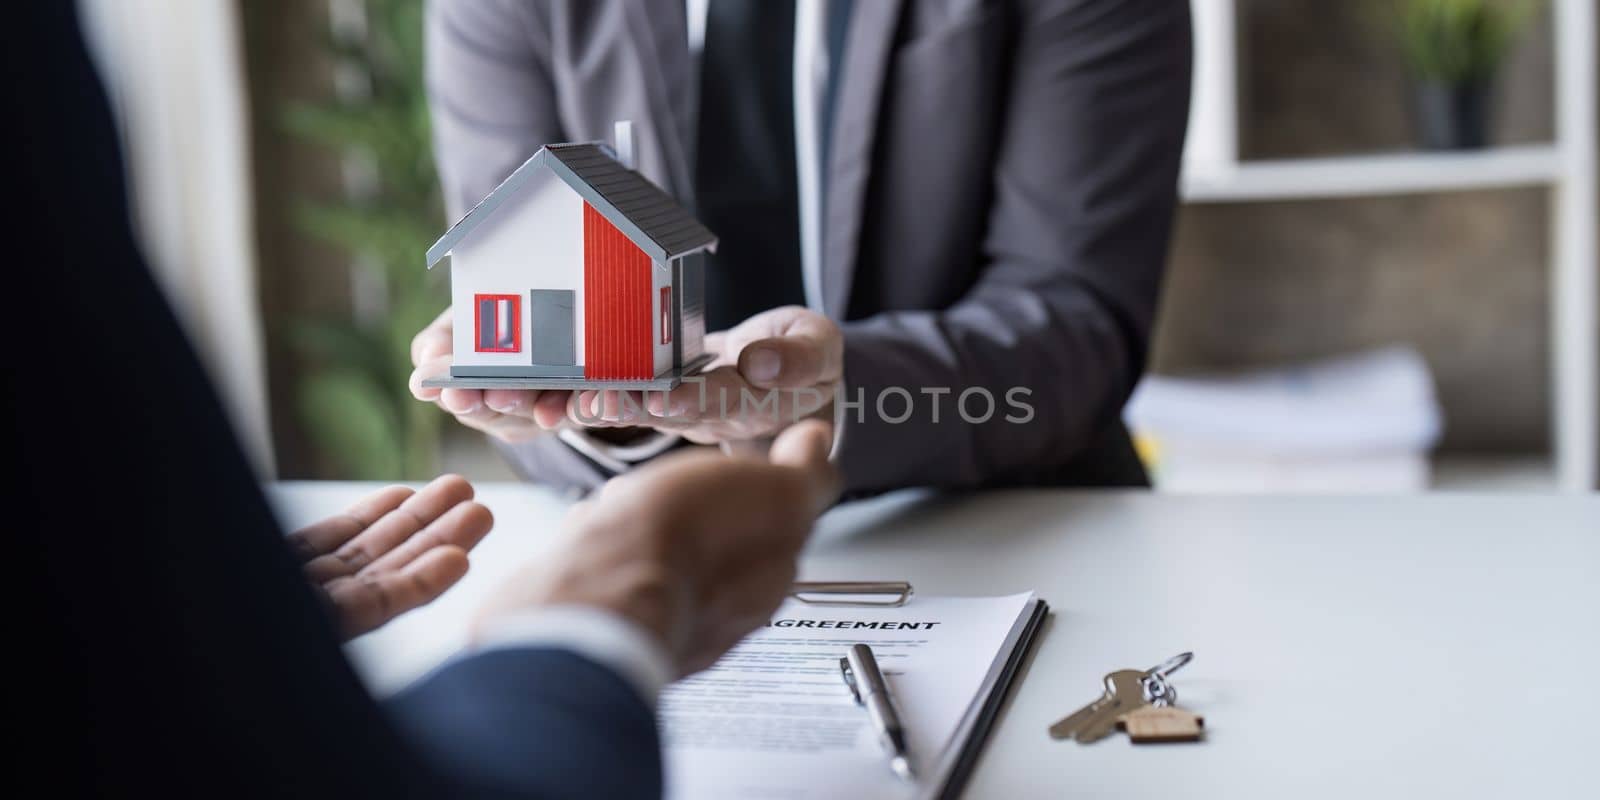 The house selling broker holds the keys and the model house is given to the customers,Real estate concept